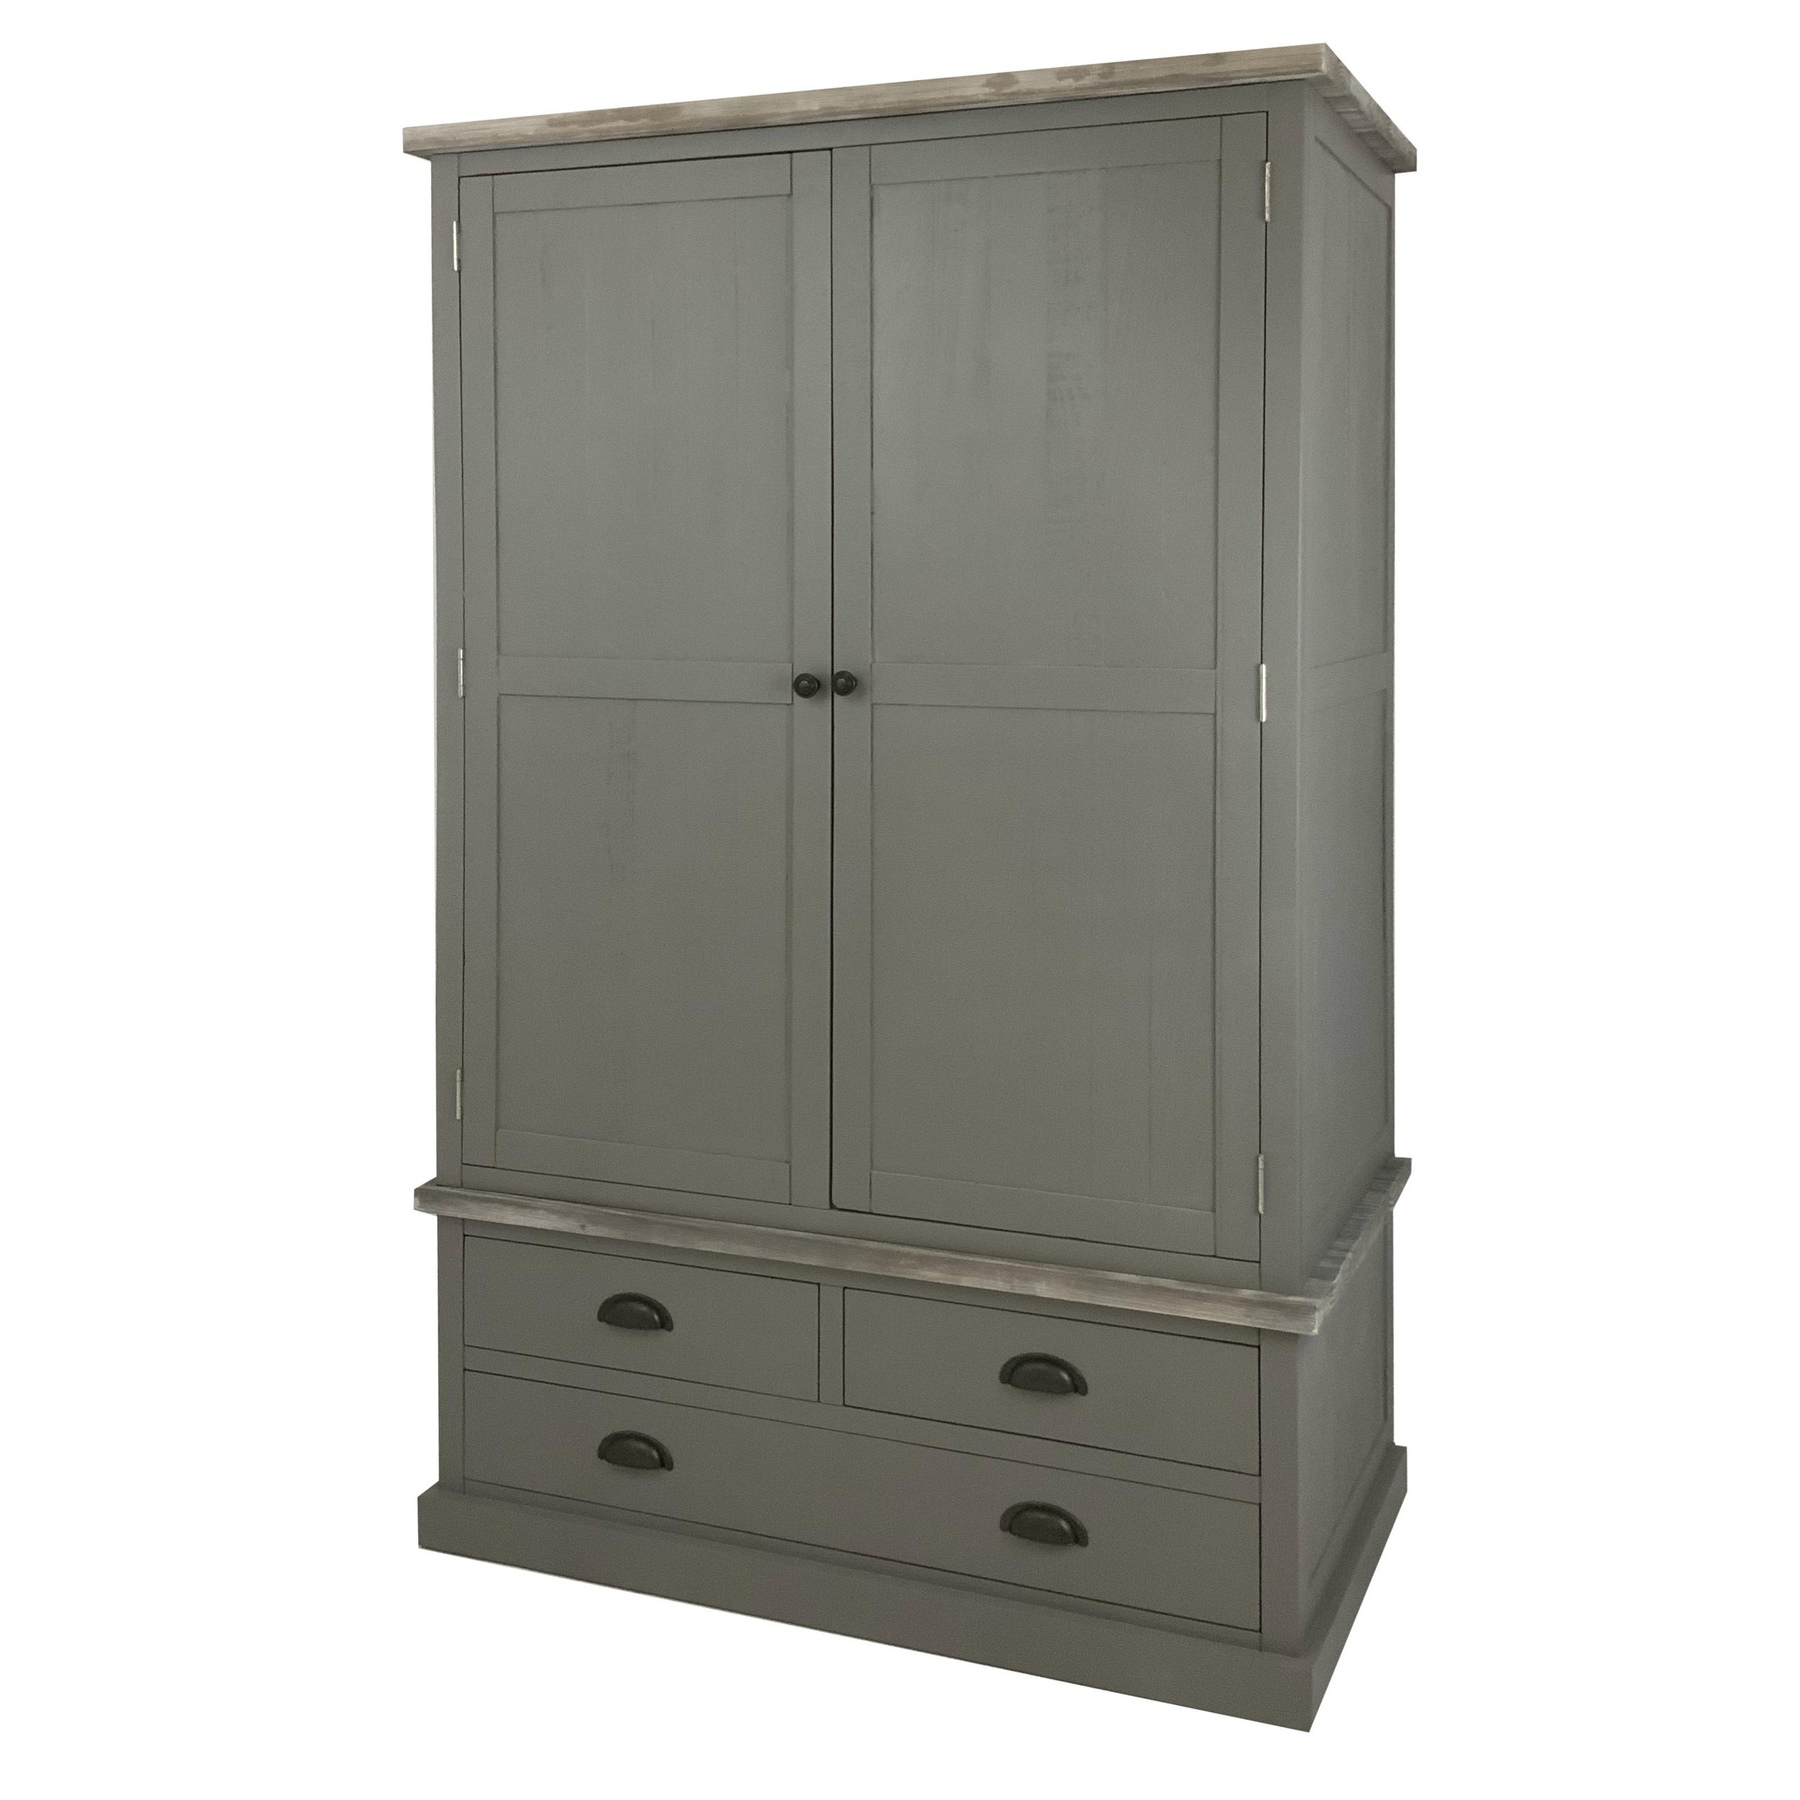 The Oxley Collection Wardrobe - Image 1